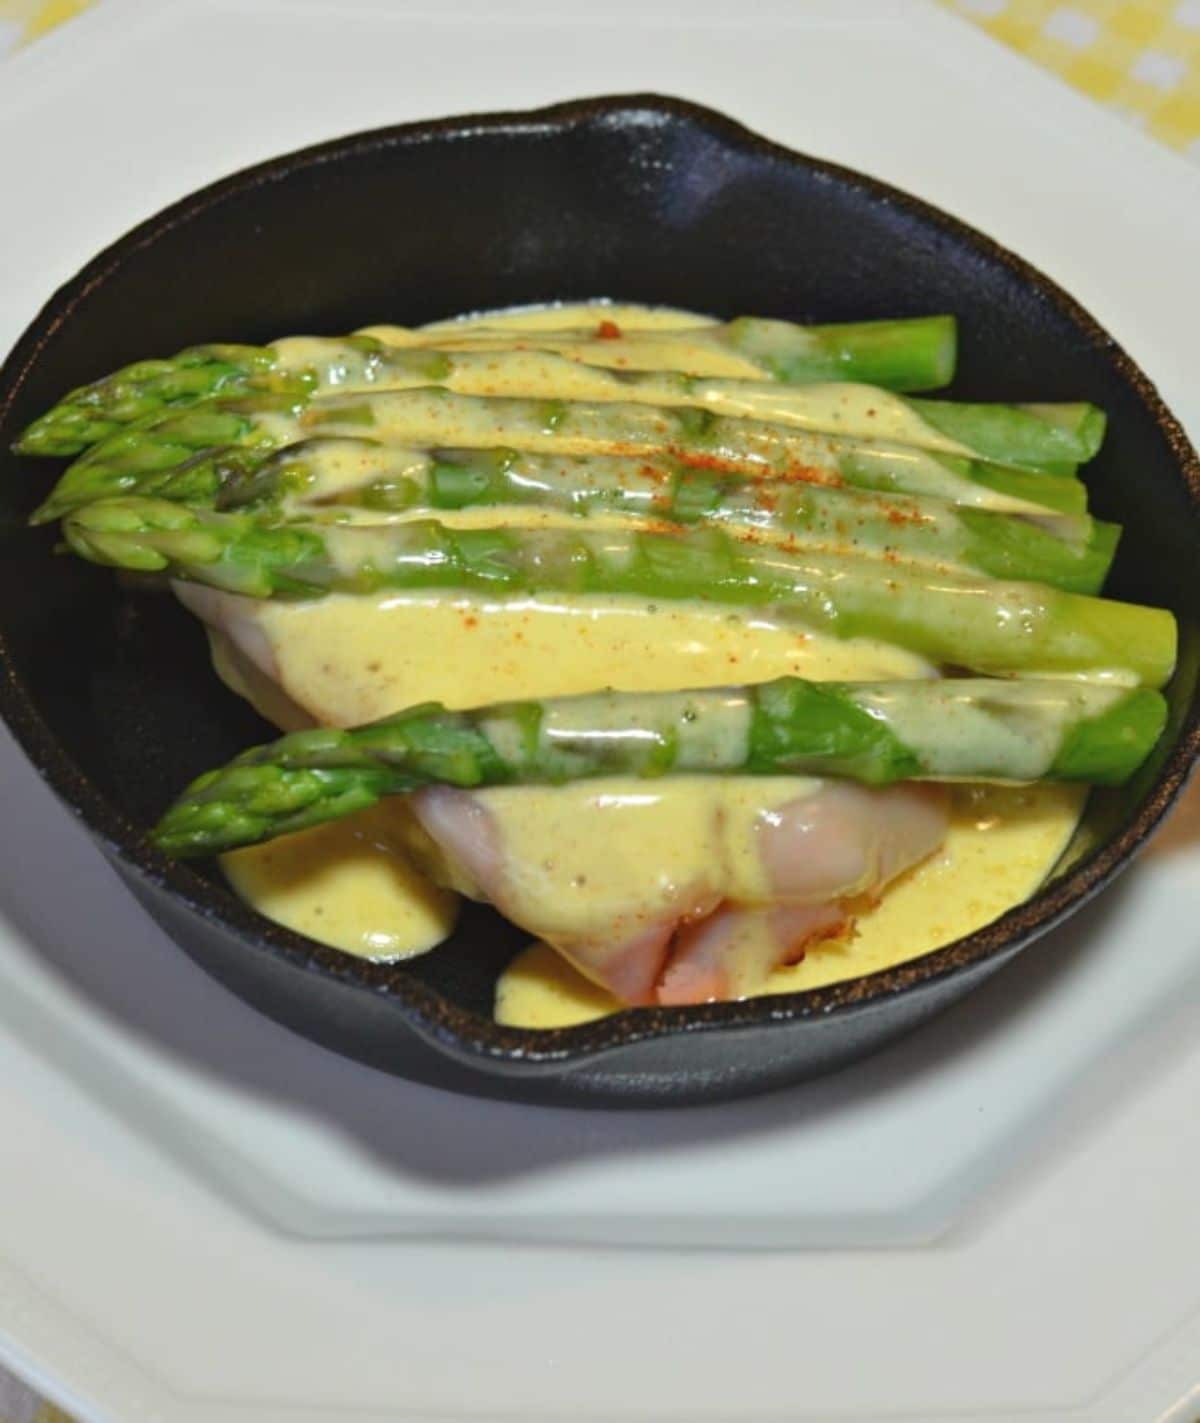 Delicious open-faced asparagus sandwiches on a black skillet.